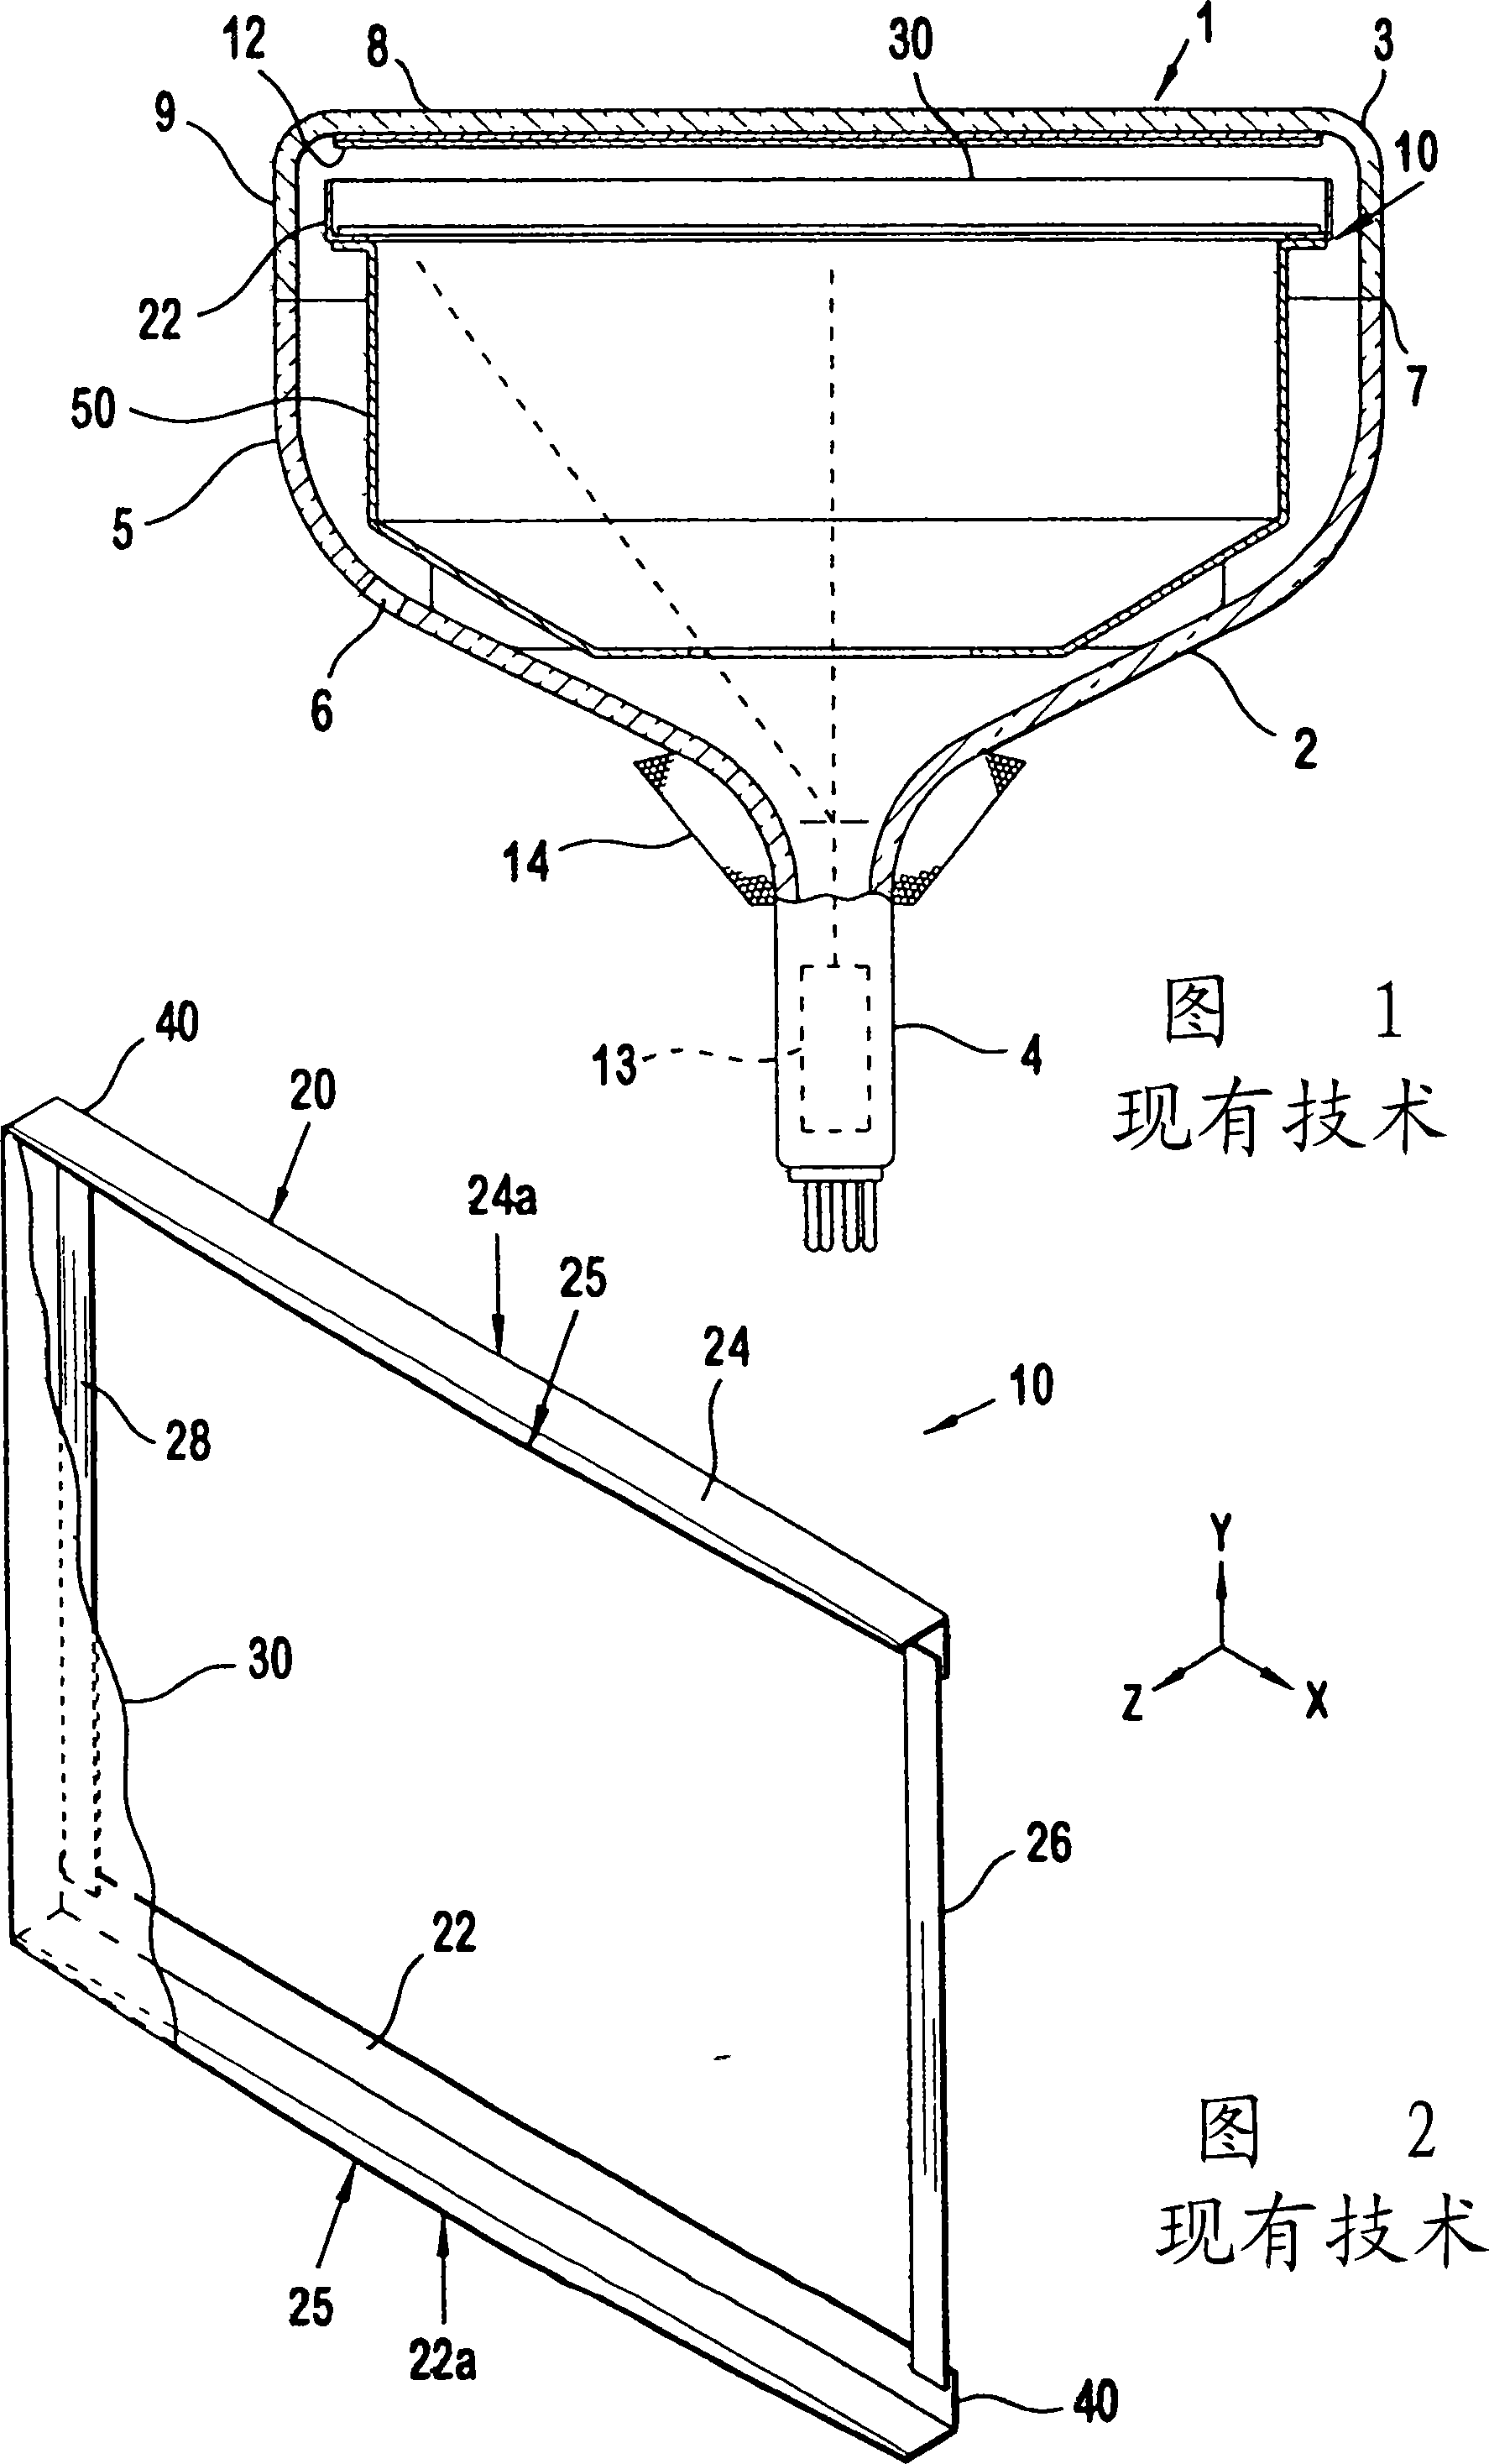 Unified magnetic shielding of tensioned mask/frame assembly and internal magnetic shield